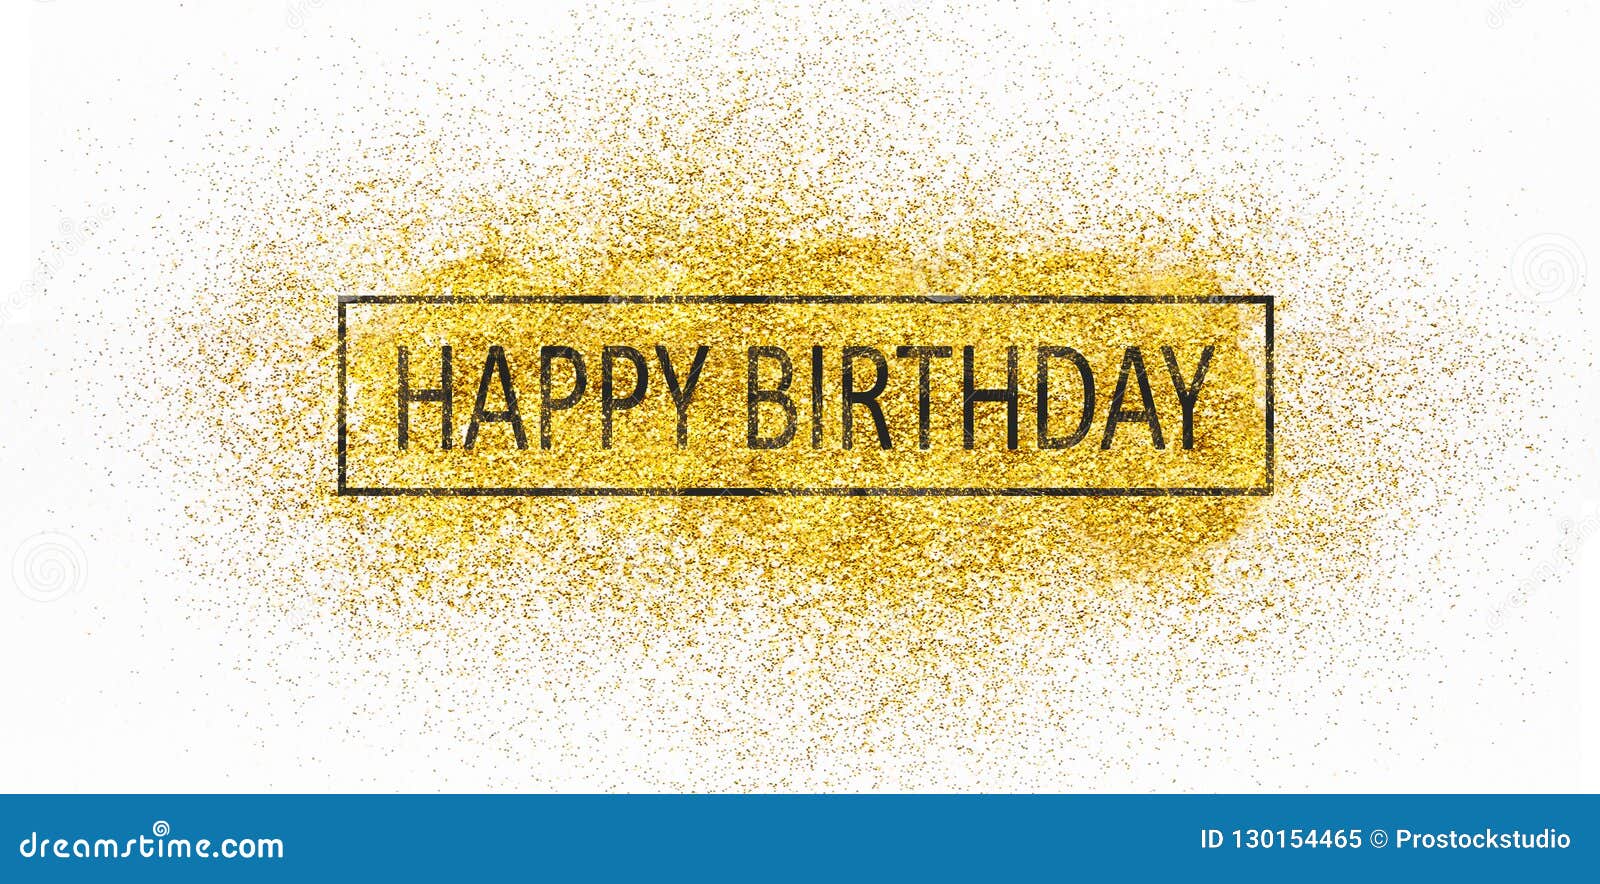 Happy Birthday Text on Scattered Gold Sparkles Stock Image - Image of  glittering, detail: 130154465